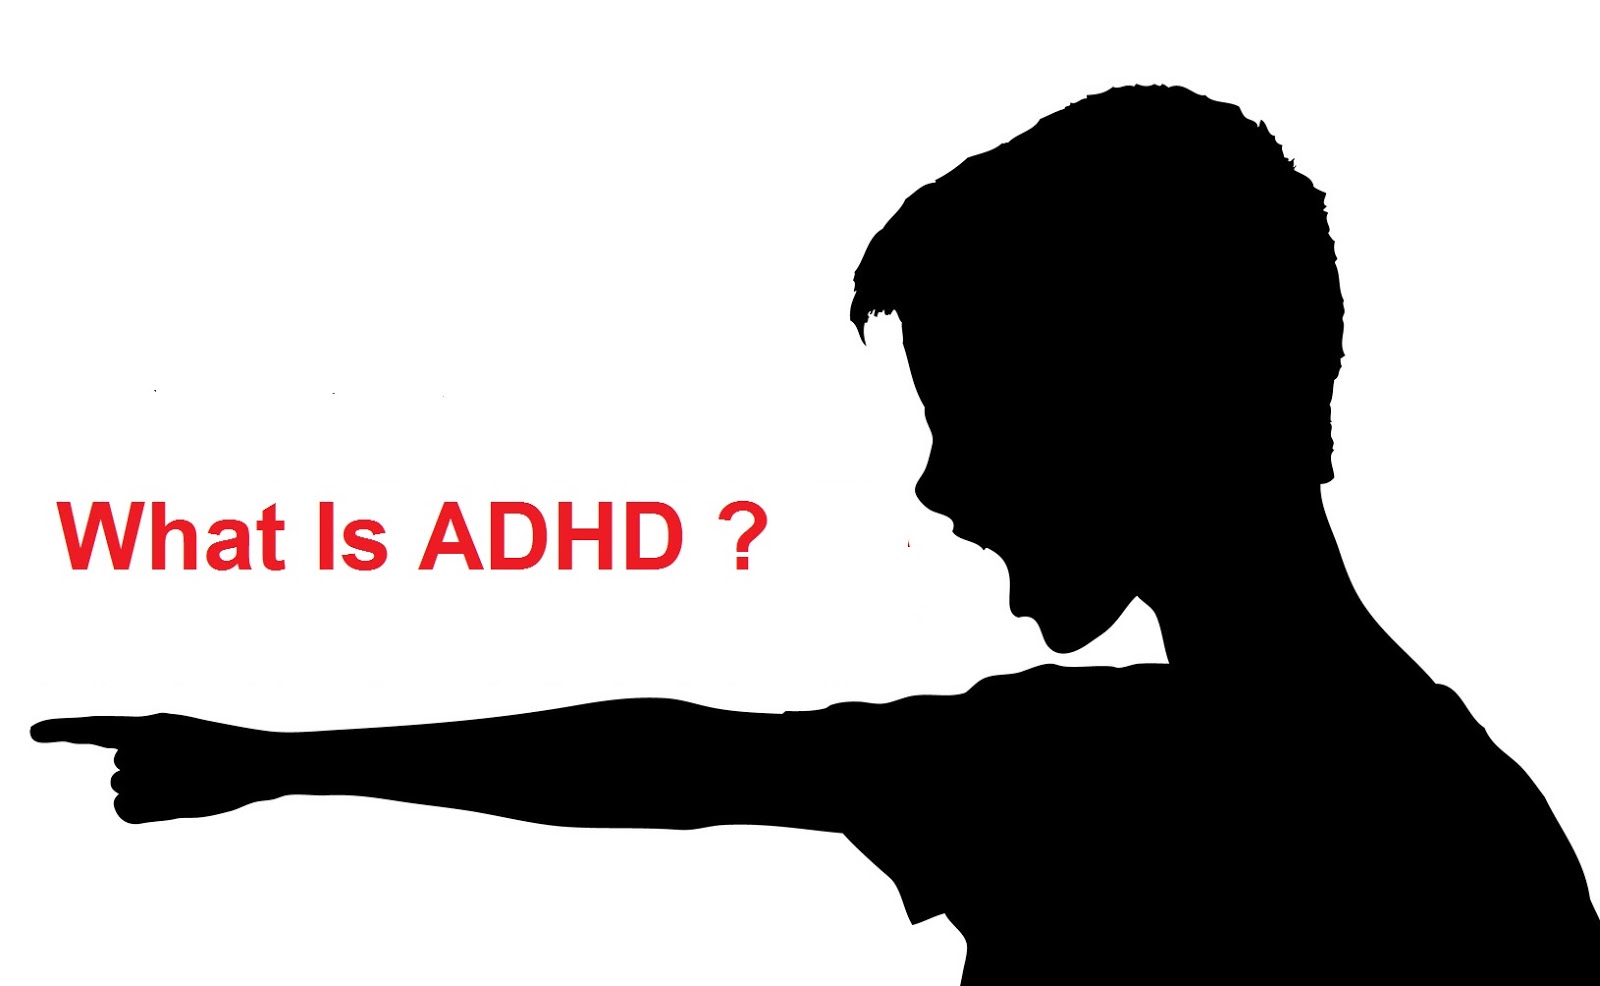 Attention disorders. ADHD treatment. What is ADHD. Руки ADHD. ADHD Disorder treatment.